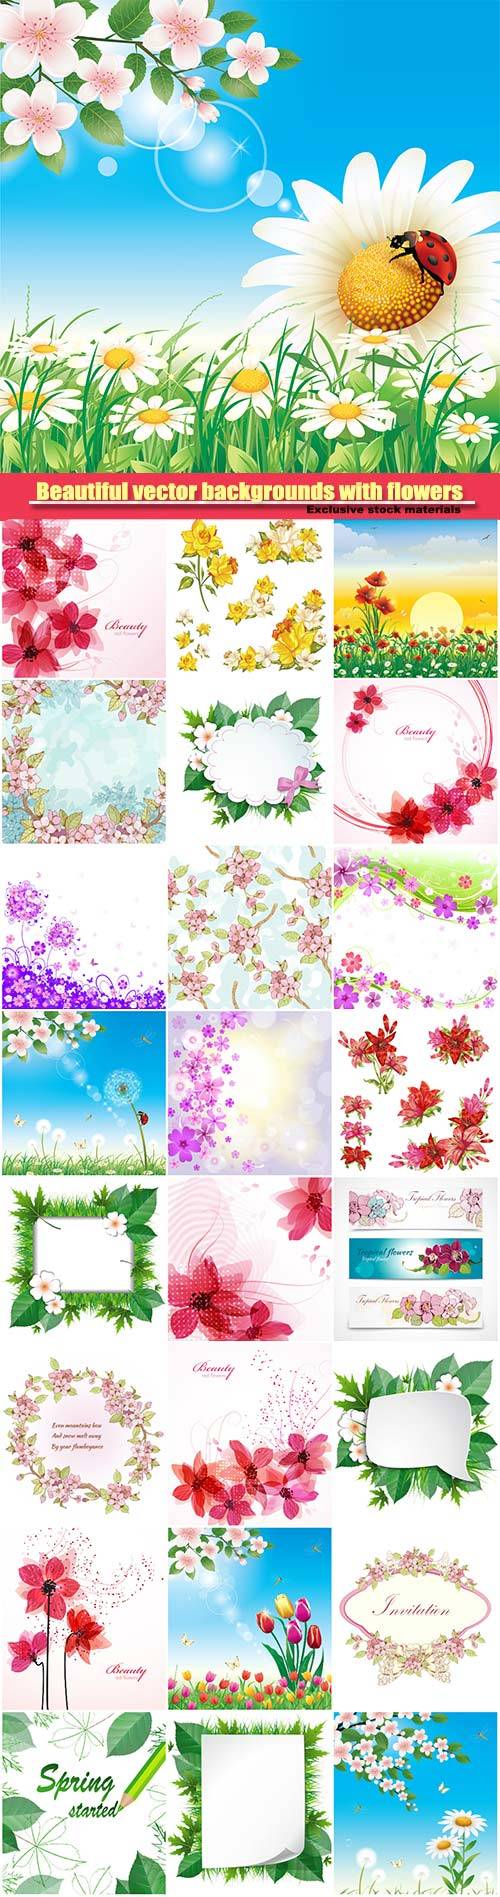 Beautiful vector backgrounds with different flowers